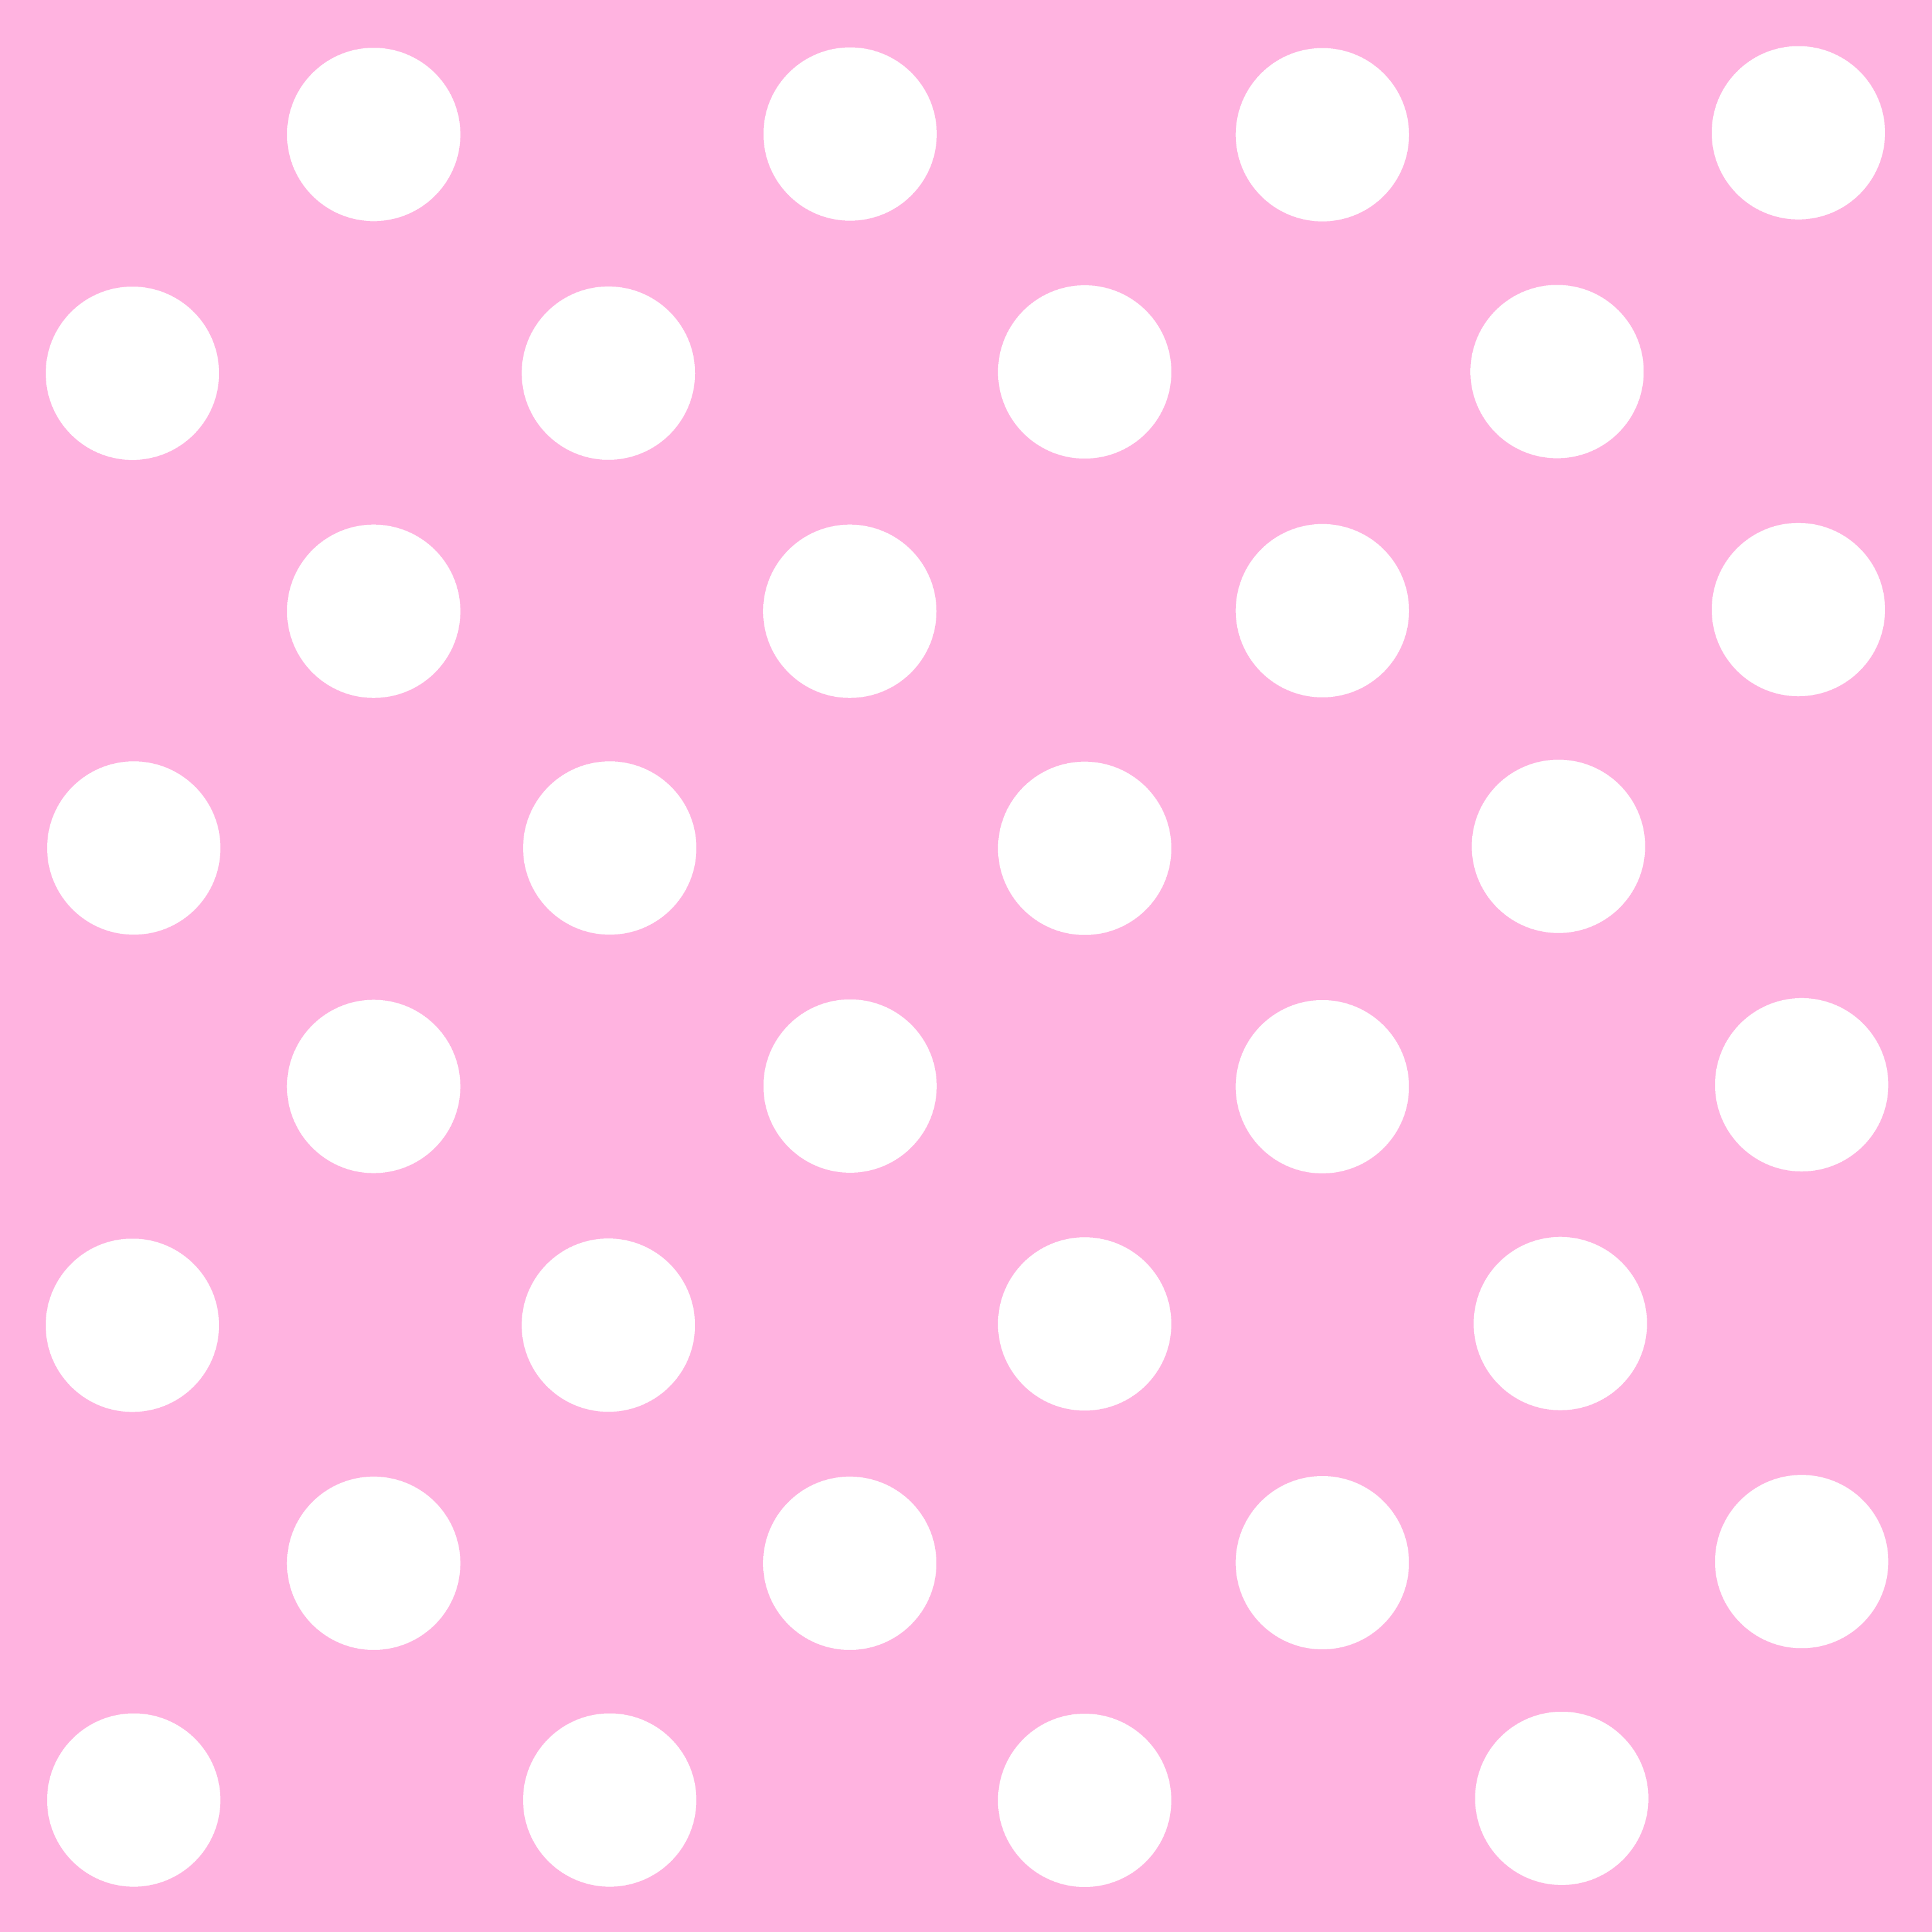 Pink And White Polka Dot Wallpaper Clipart Free To Use Clip Art ...